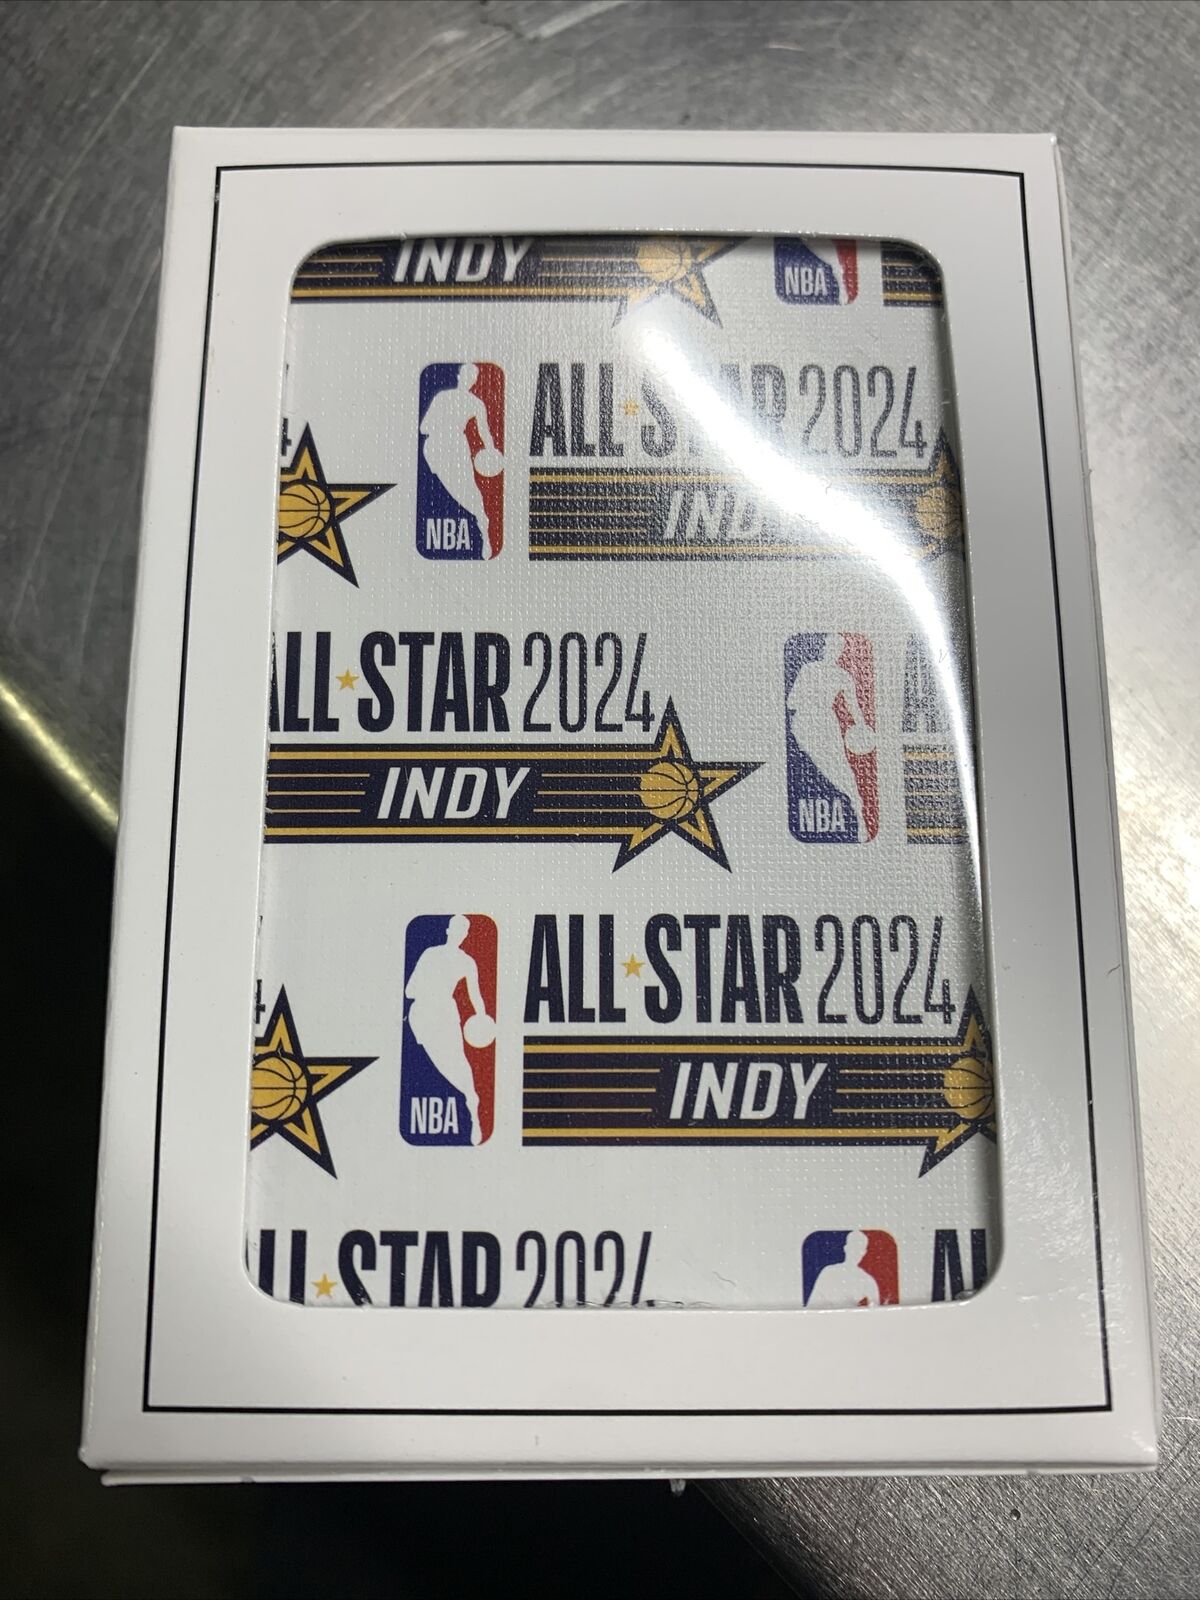 NBA ALL STAR 2024 INDY Playing Cards Deck Brand New